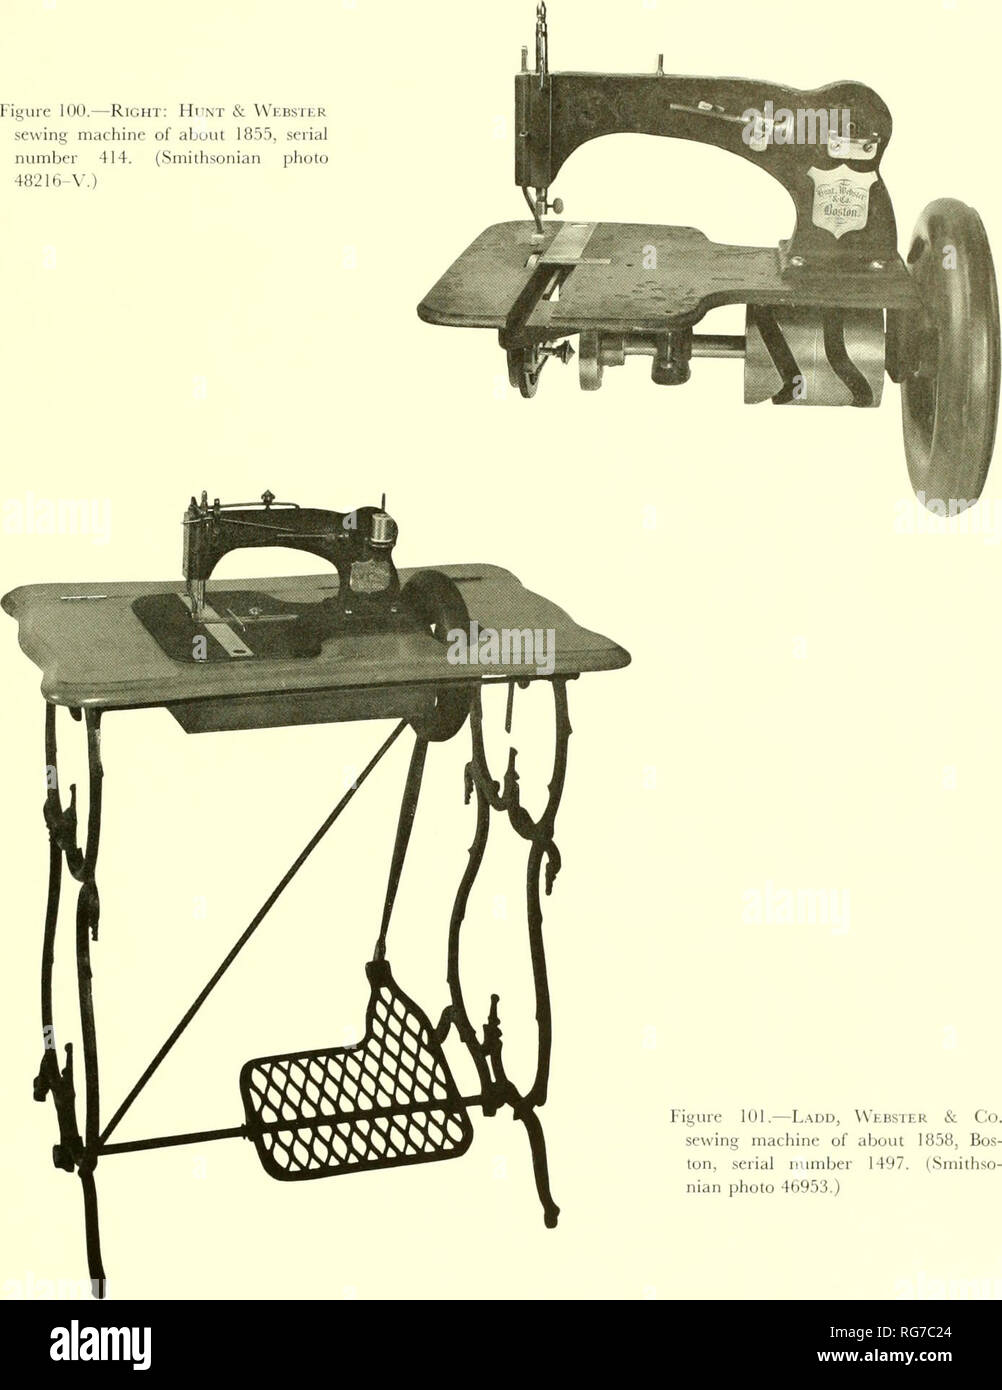 Bulletin - United States National Museum. Science. Figure 100.—Right: Hint  &amp; Webster sewing machine of about 1855, serial number 414. (Smithsonian  photo 48216-V.). Figure 101.—Ladd, Webster &amp; Co. sewing machine of